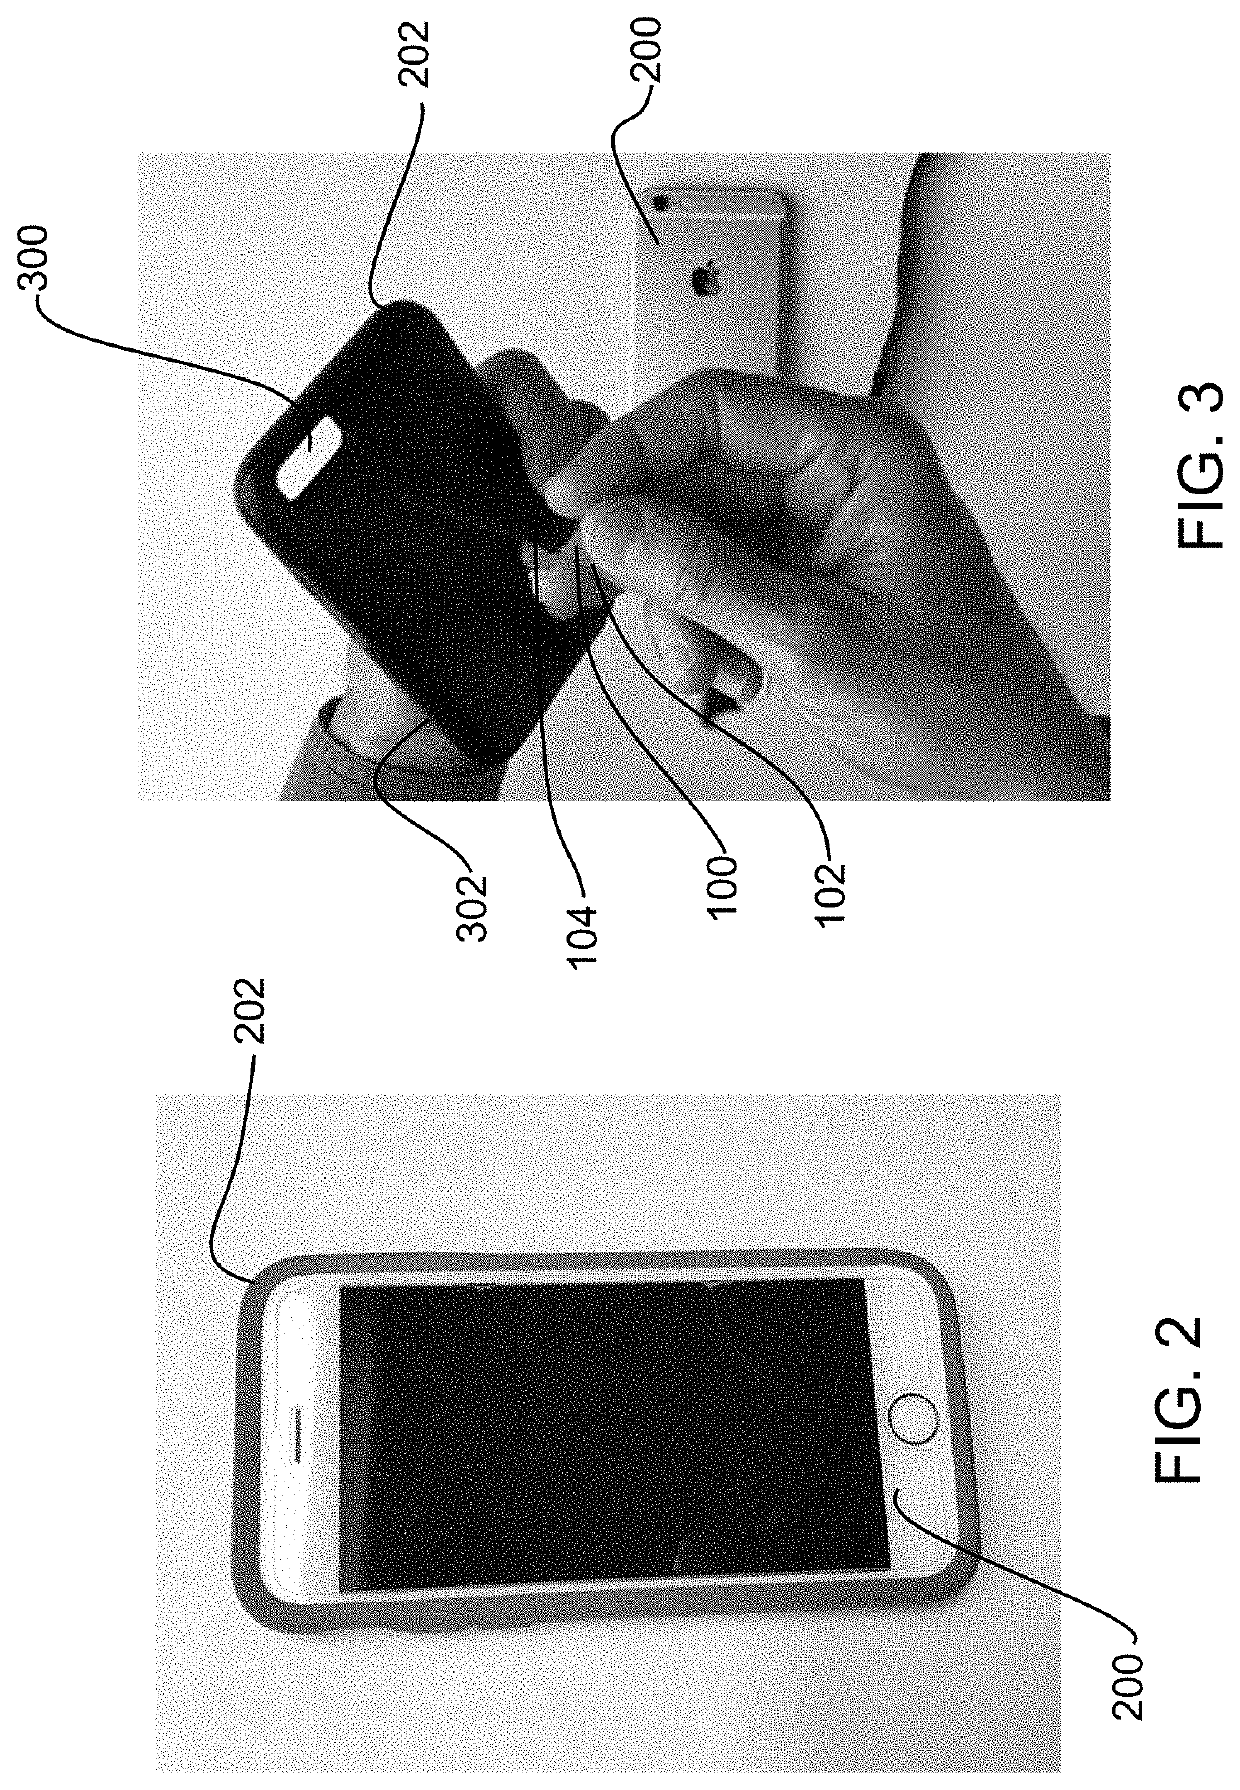 Mobile device elastomeric support strap with visibly identifiable expandable logo imprints